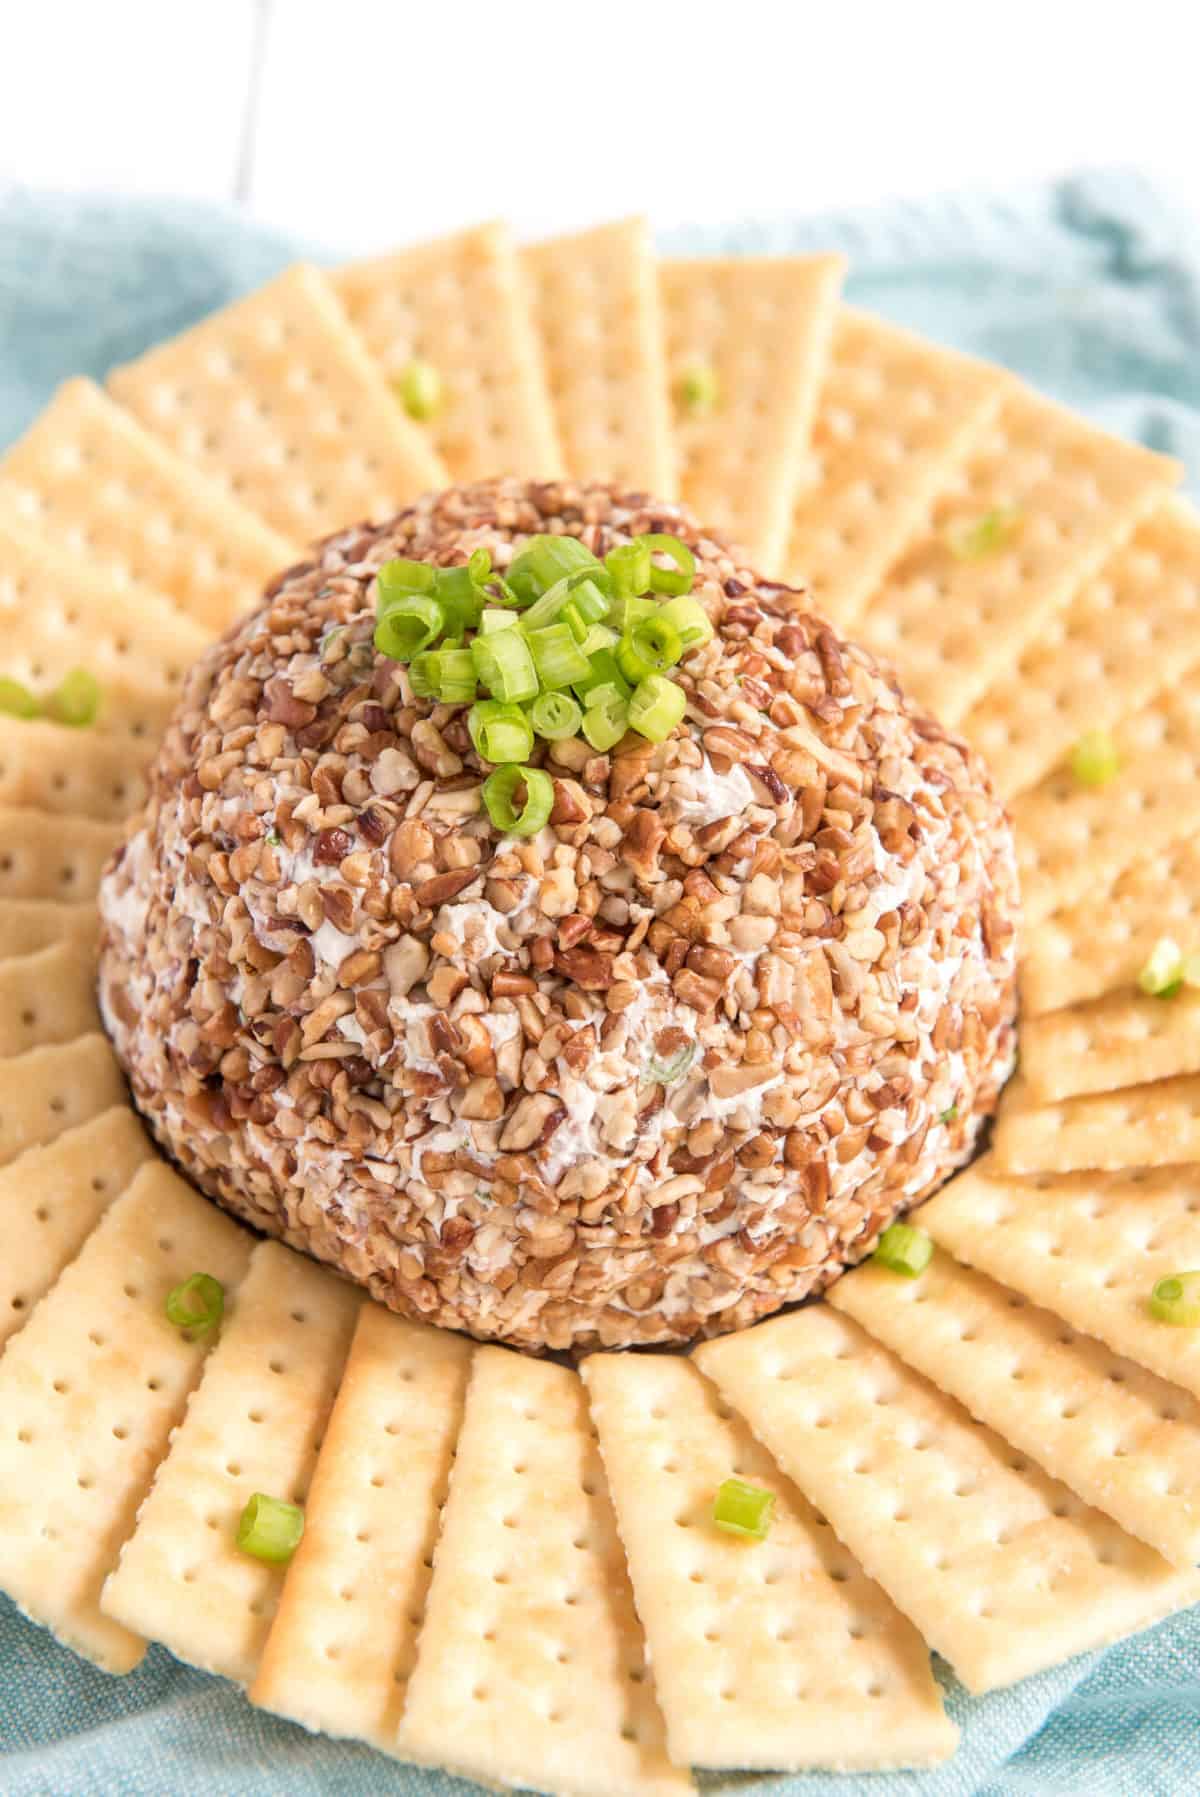 You can never go wrong with a cheese ball, especially when hosting a holiday gathering! Salty, crunchy, and cheesy, it's the perfect appetizer for guests to munch on as they visit with each other. I love how simple they are to throw together, and everyone loves snacking on them before a rich and hearty meal. #cheeseball #homemadecheeseball #cheeseballrecipe #easycheeseball #easyappetizer #partyappetizer #holidayappetizer